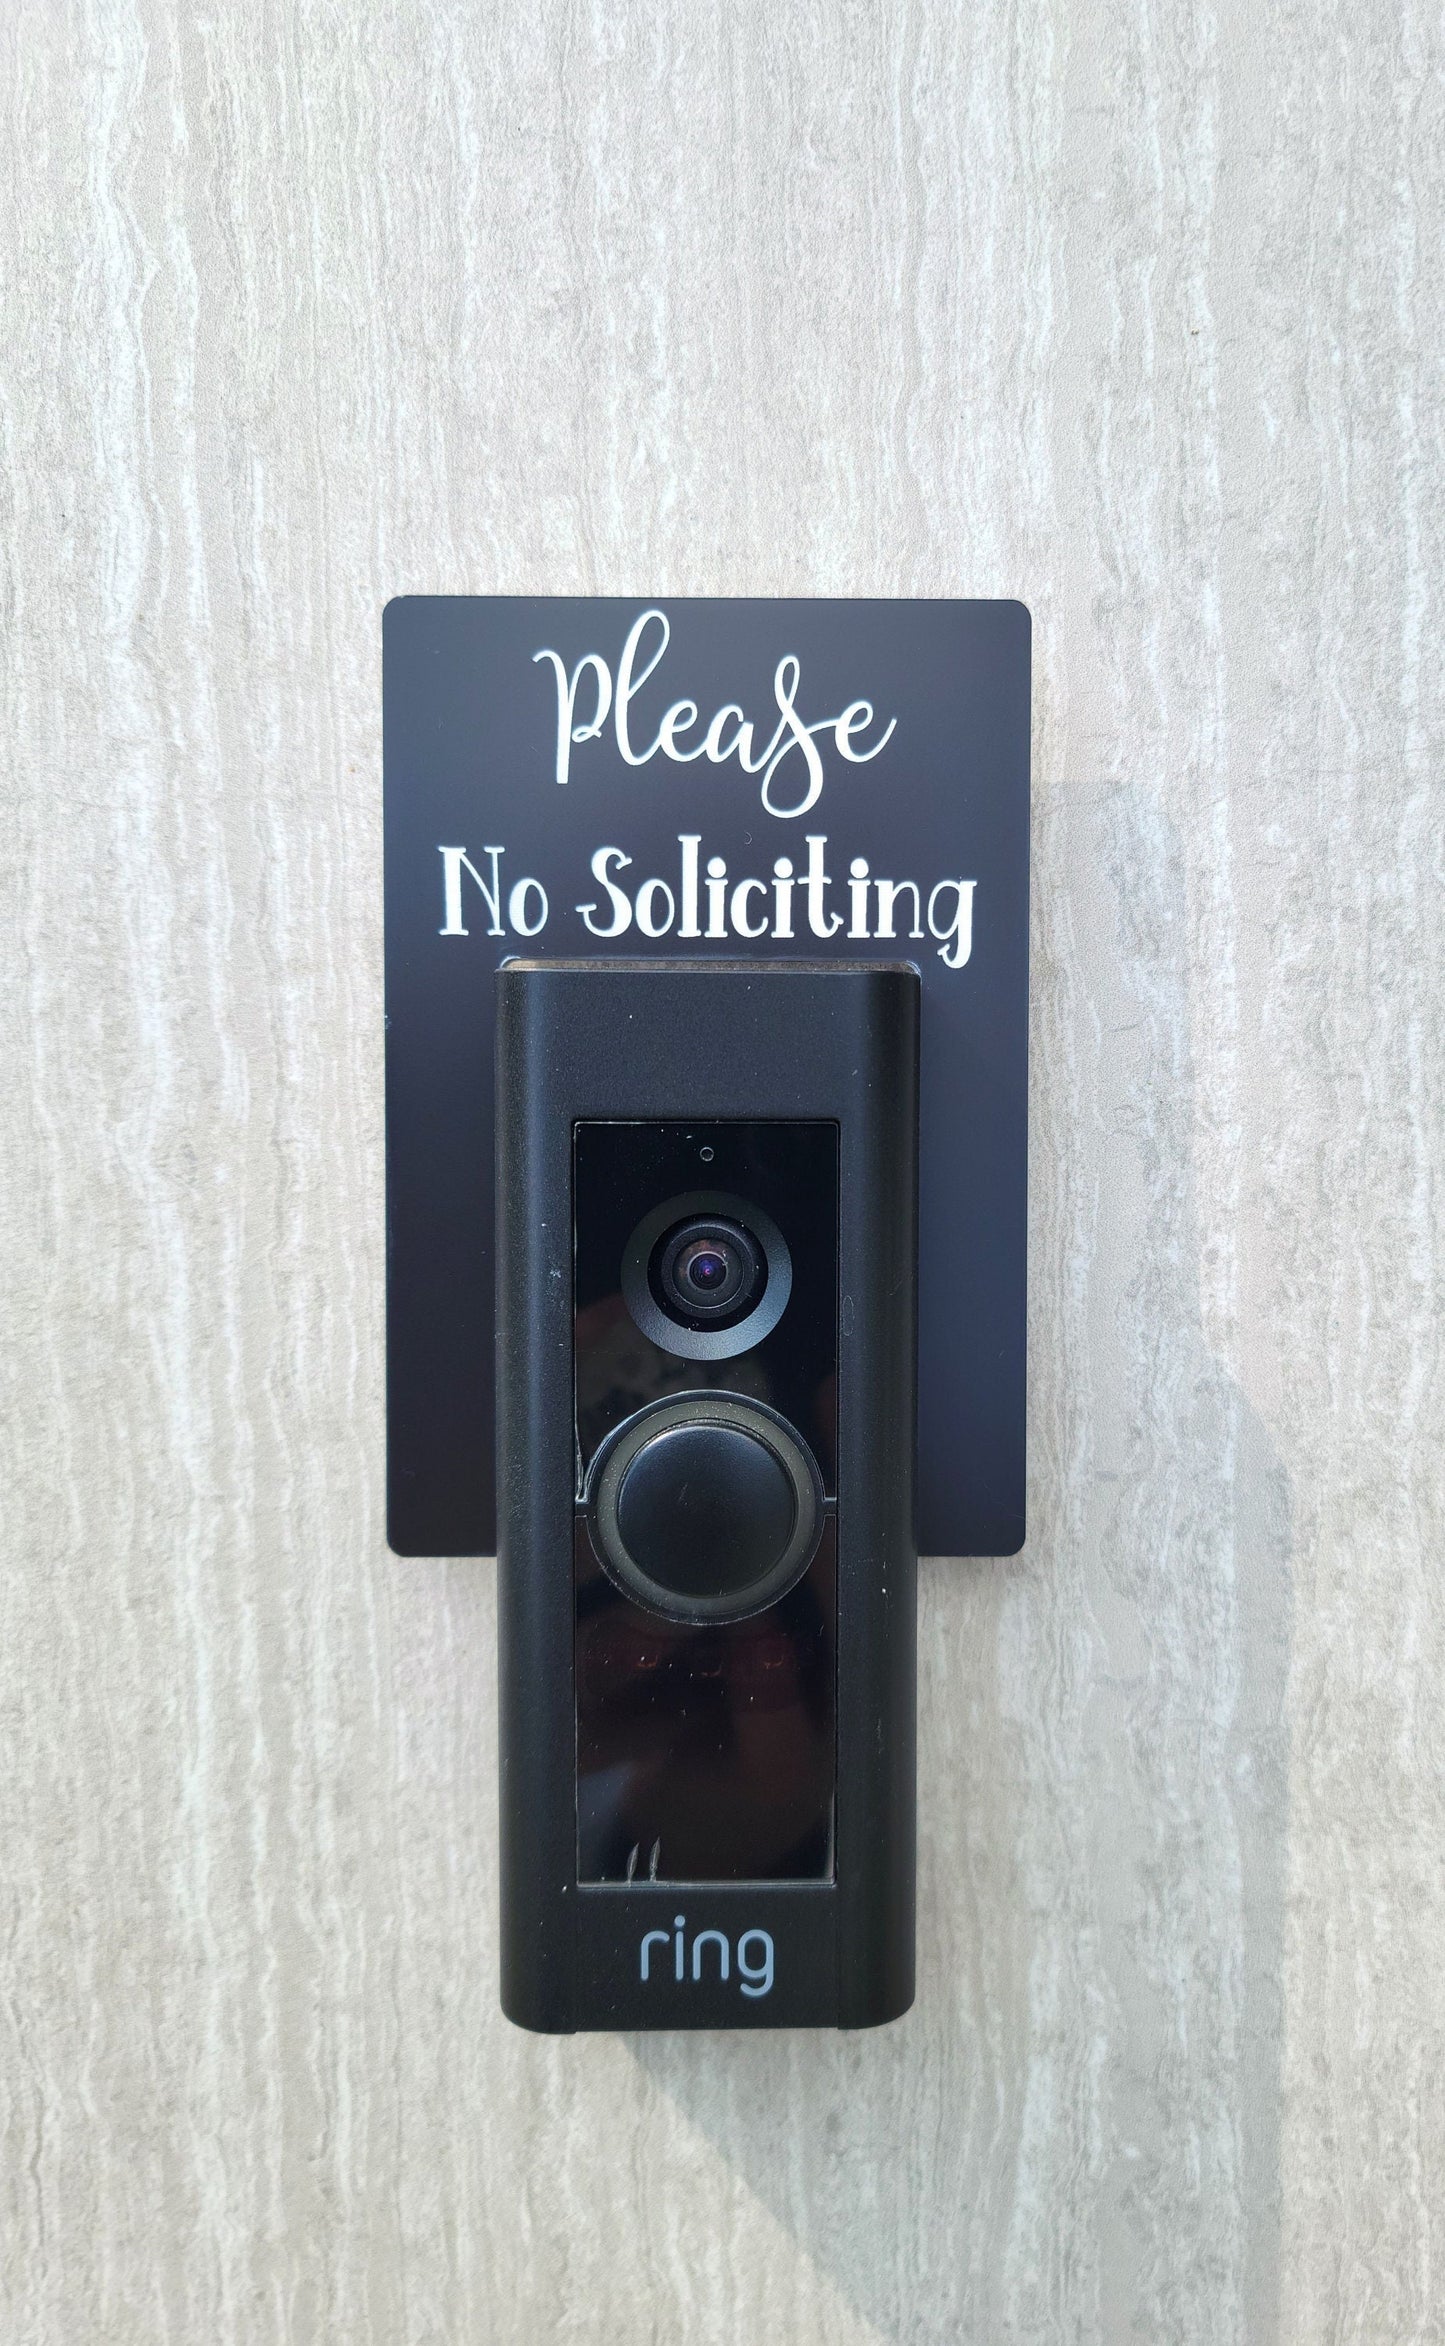 Please No Soliciting Partial Video Doorbell Surround